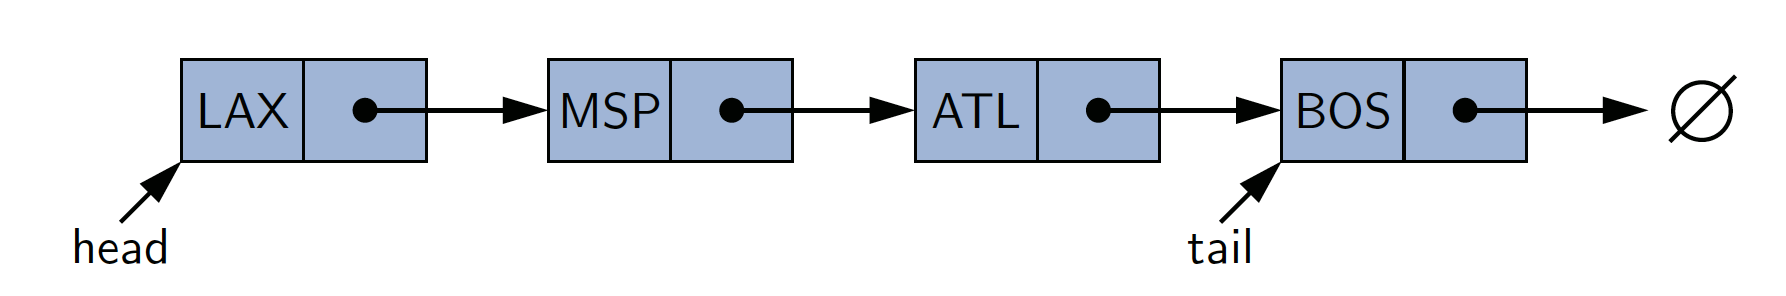 Singly Linked List with head and tail